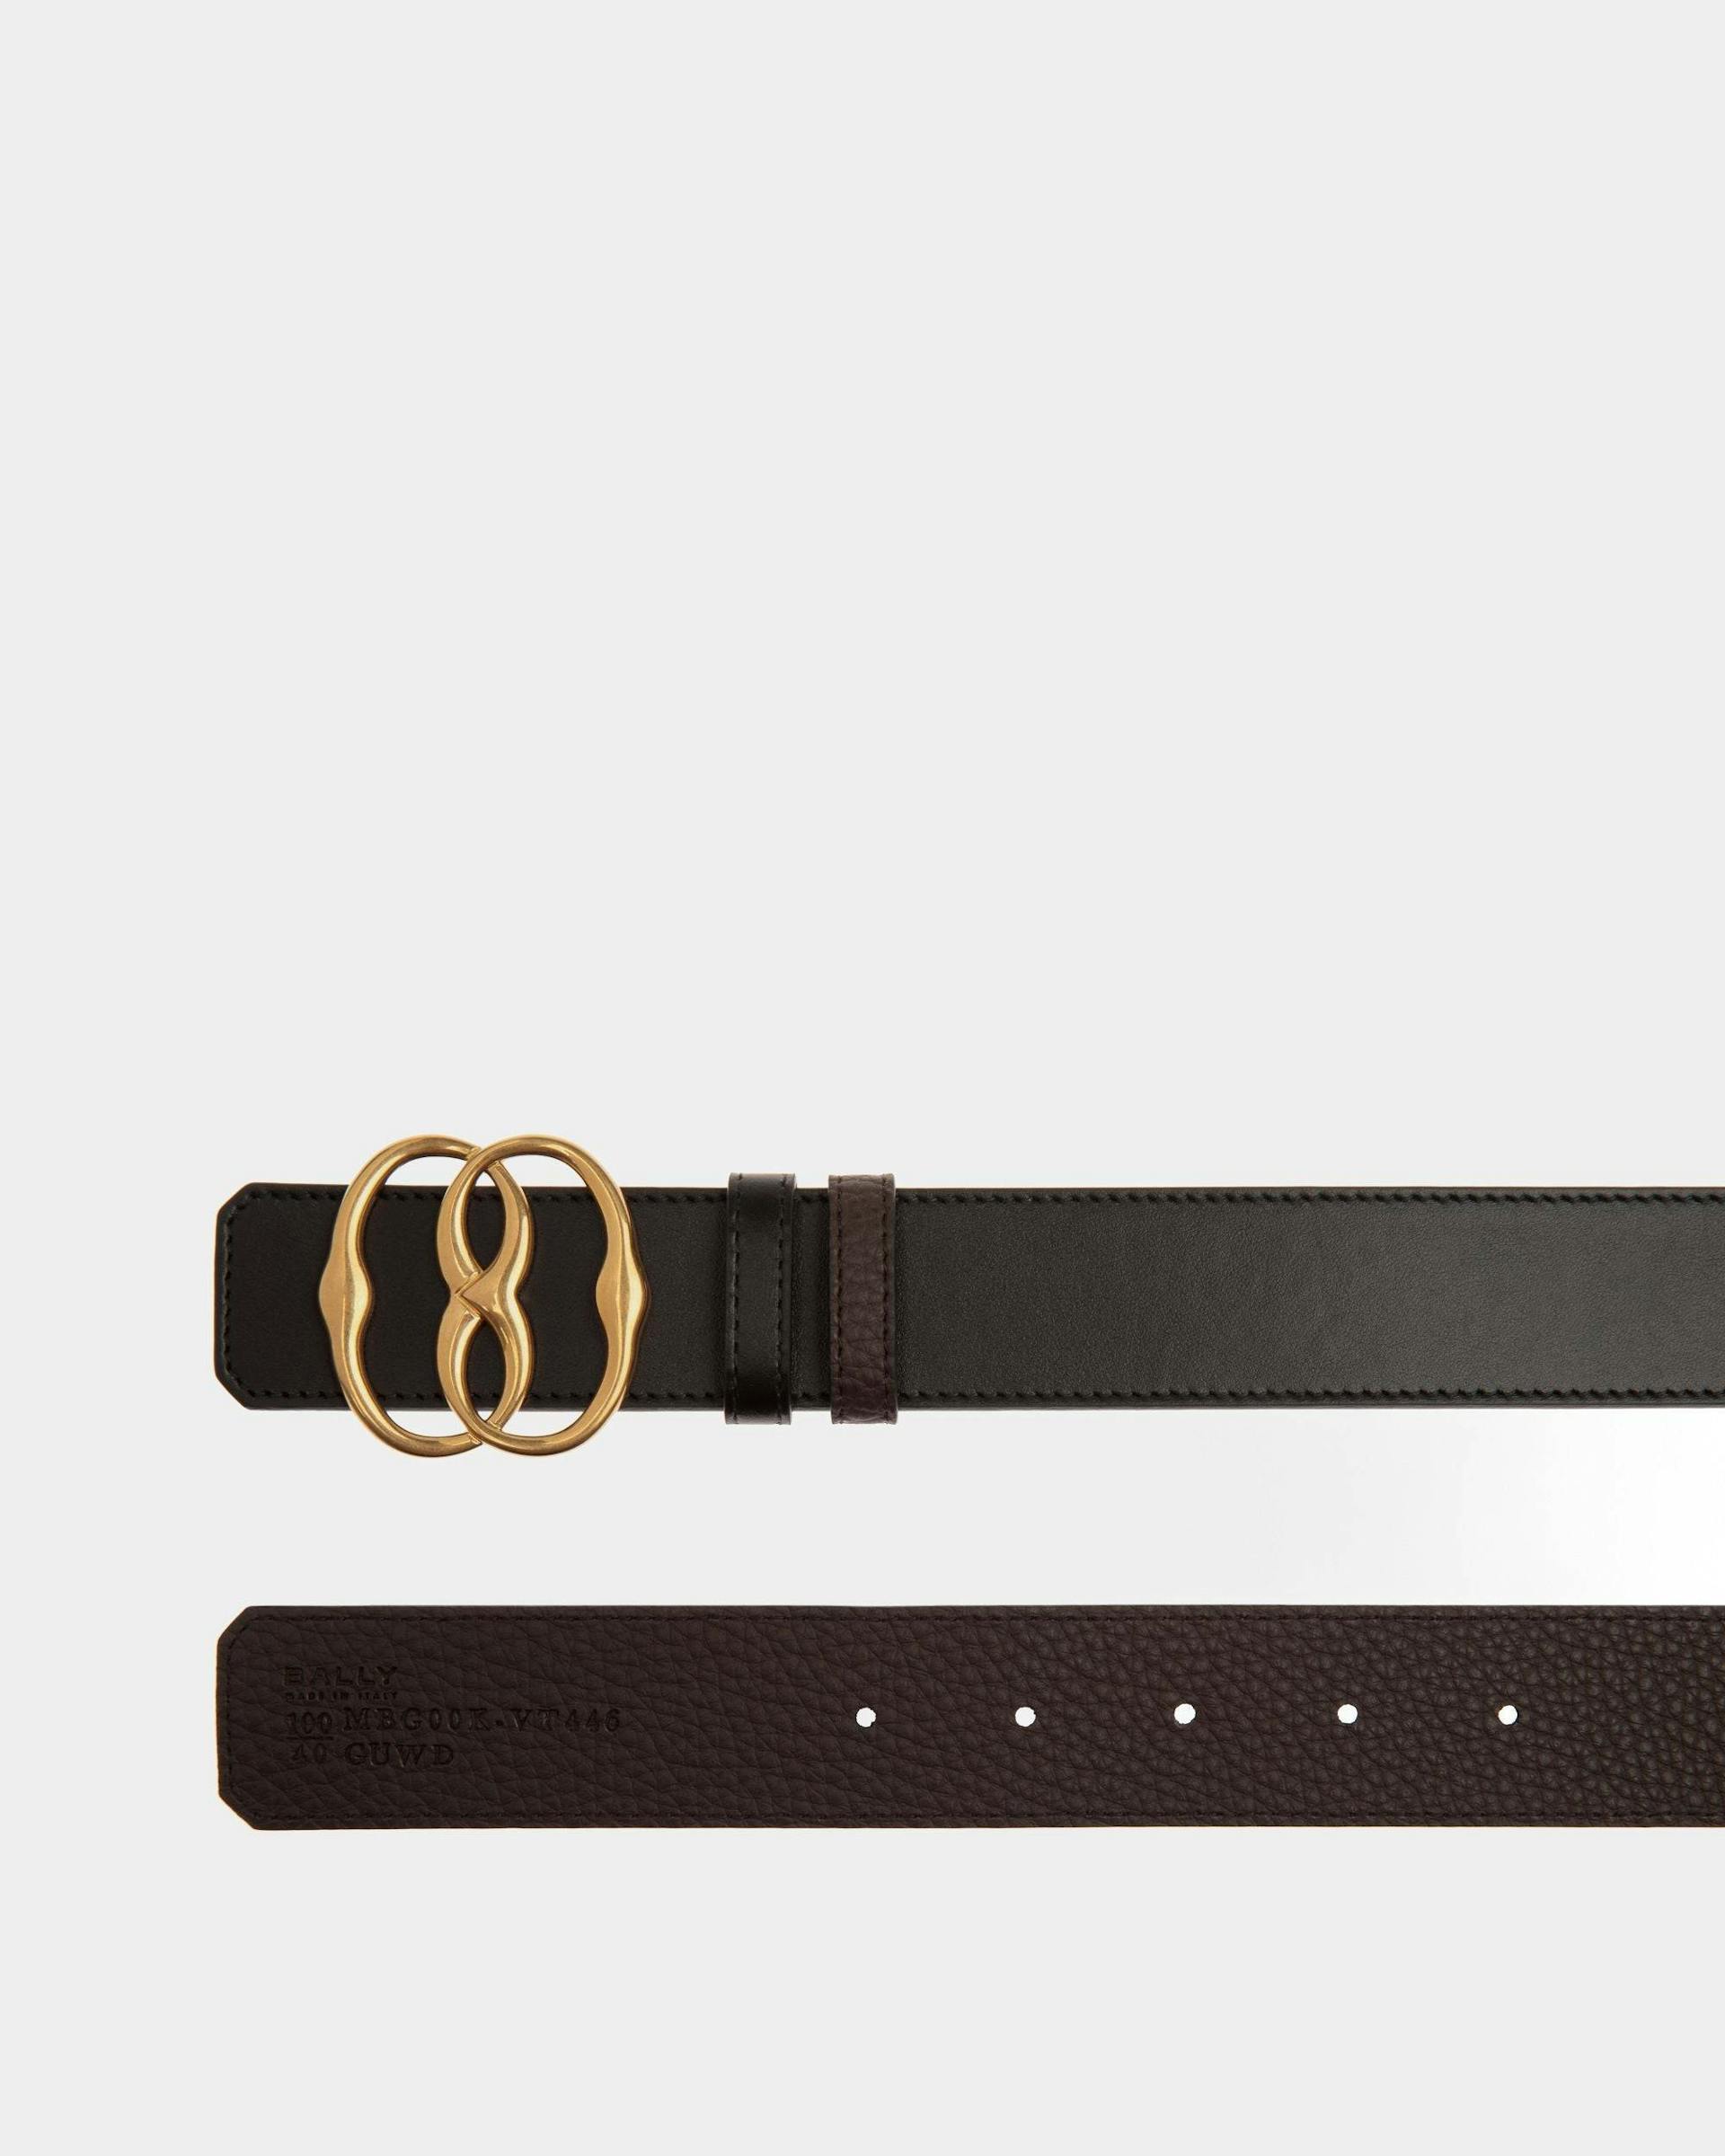 Men's Bally Iconic 35mm Belt In Brown And Black Leather | Bally | Still Life Detail